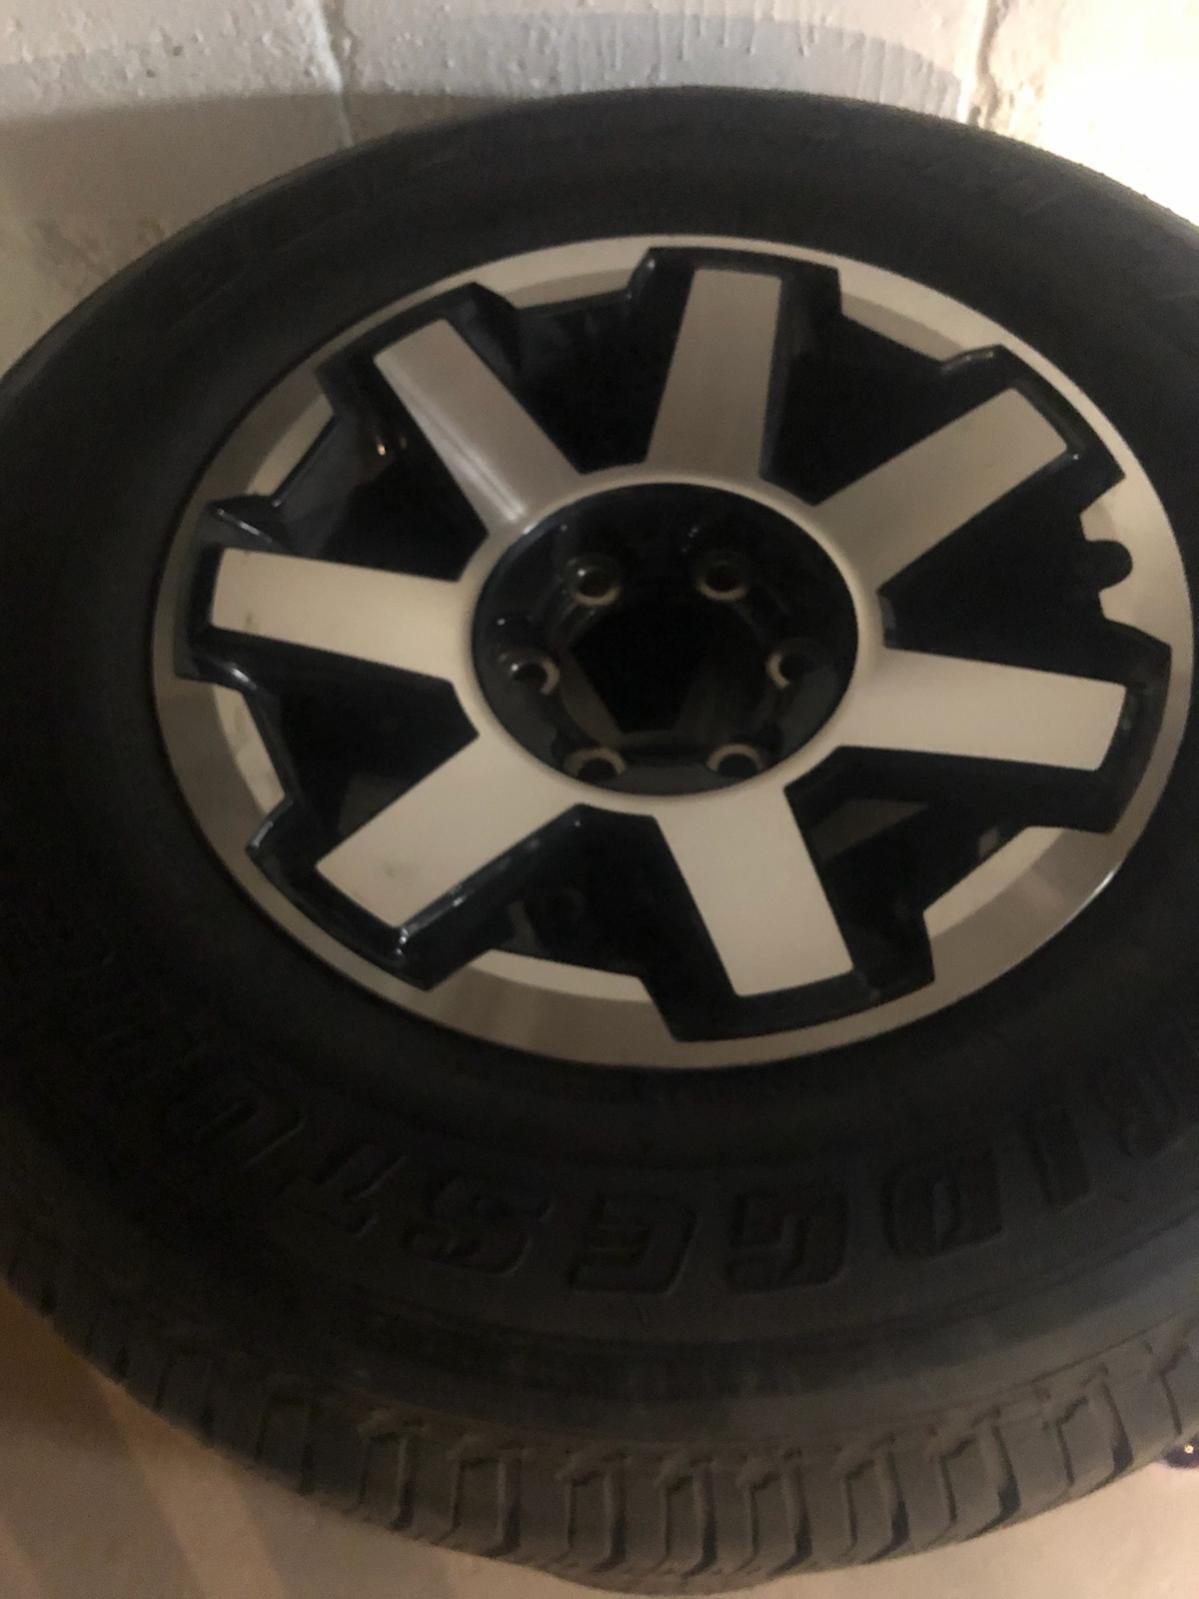 FS 2019 TRD ORP WHEELS AND TIRES 0 Medina, Ohio  SOLD-tires-2-jpg